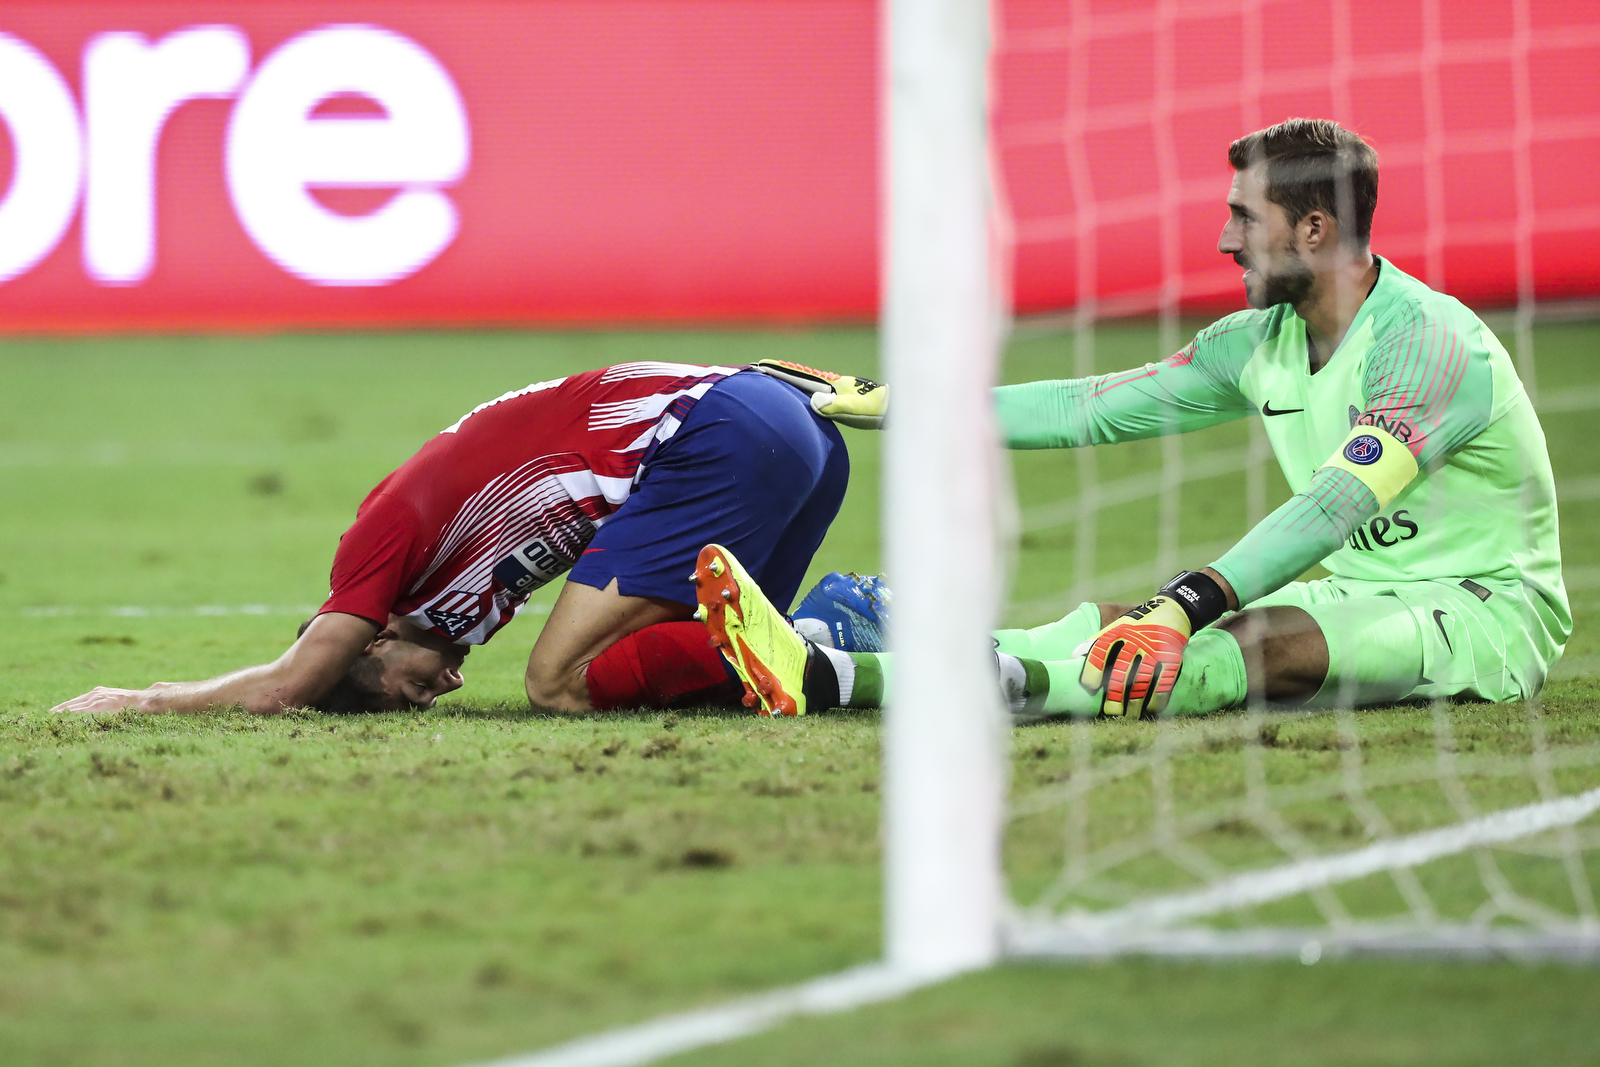  Paris Saint-Germain’s Gianluigi Buffon, right, consoles Atletico Madrid’s Luciano Vietto after the International Champions Cup match between Paris Saint-Germain and Atletico Madrid in Singapore, Monday, July 30, 2018. (AP Photo/Yong Teck Lim) 